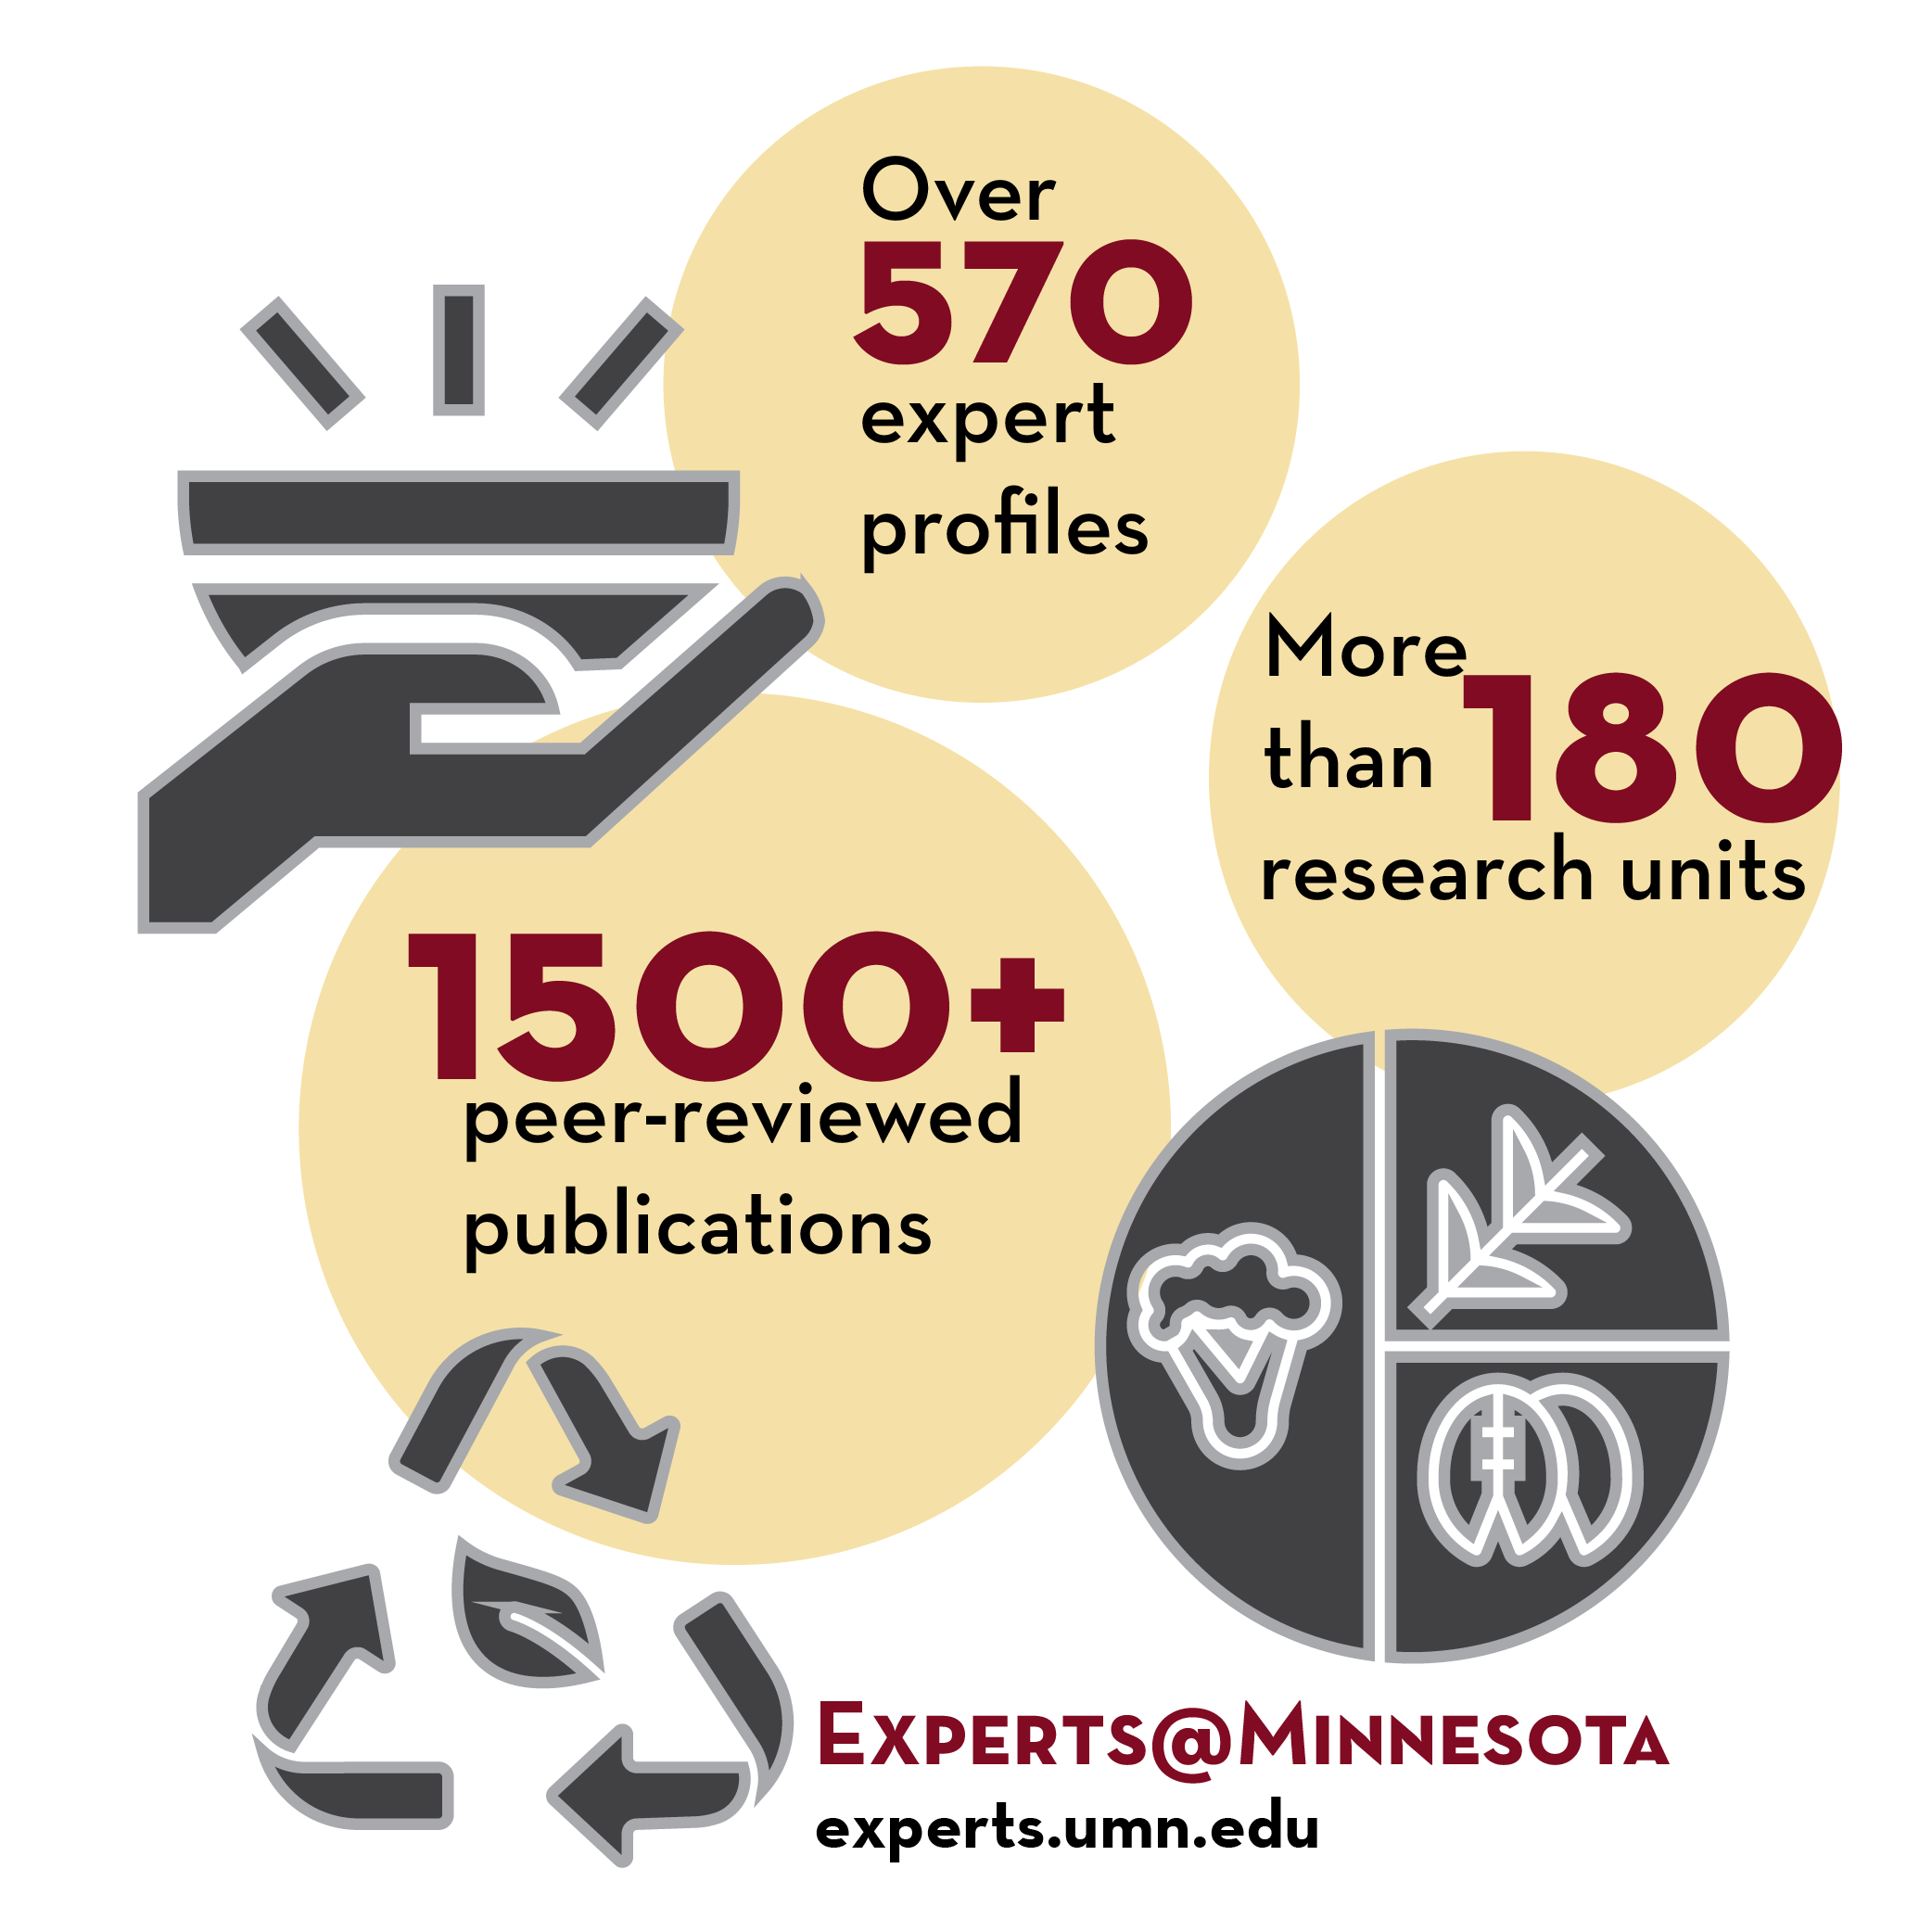 SDG 2 Experts: Over 570 experts, more than 180 units, 1500 plus pubs. 